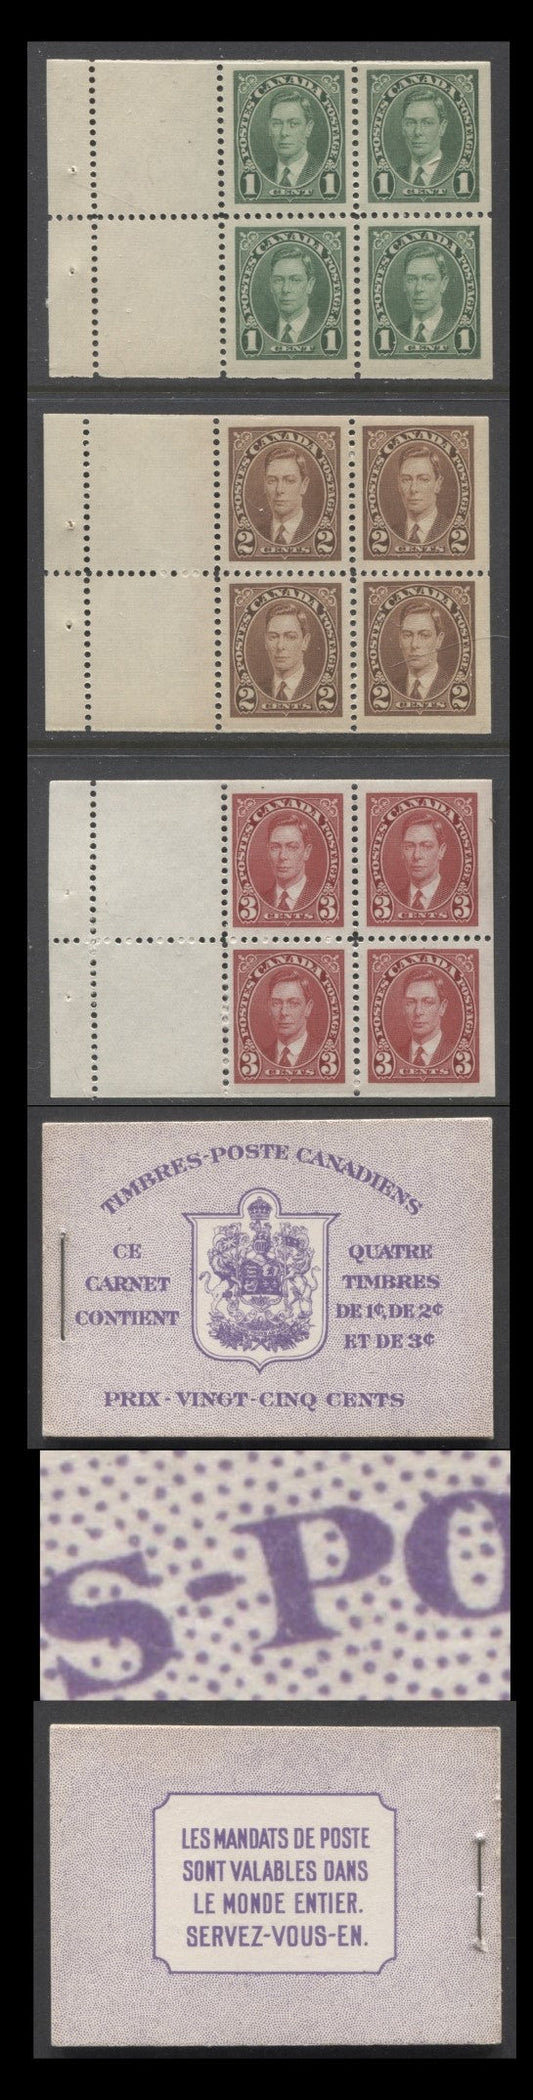 Lot 24 Canada #BK31g 1937-1942 Mufti Issue, Complete 25¢ French Booklet, One Pane of 4 + 2 Labels of each of 1c, 2c and 3c, 6¢ Airmail Rate on Rate Page, Purple Type IIpB Covers, Fine